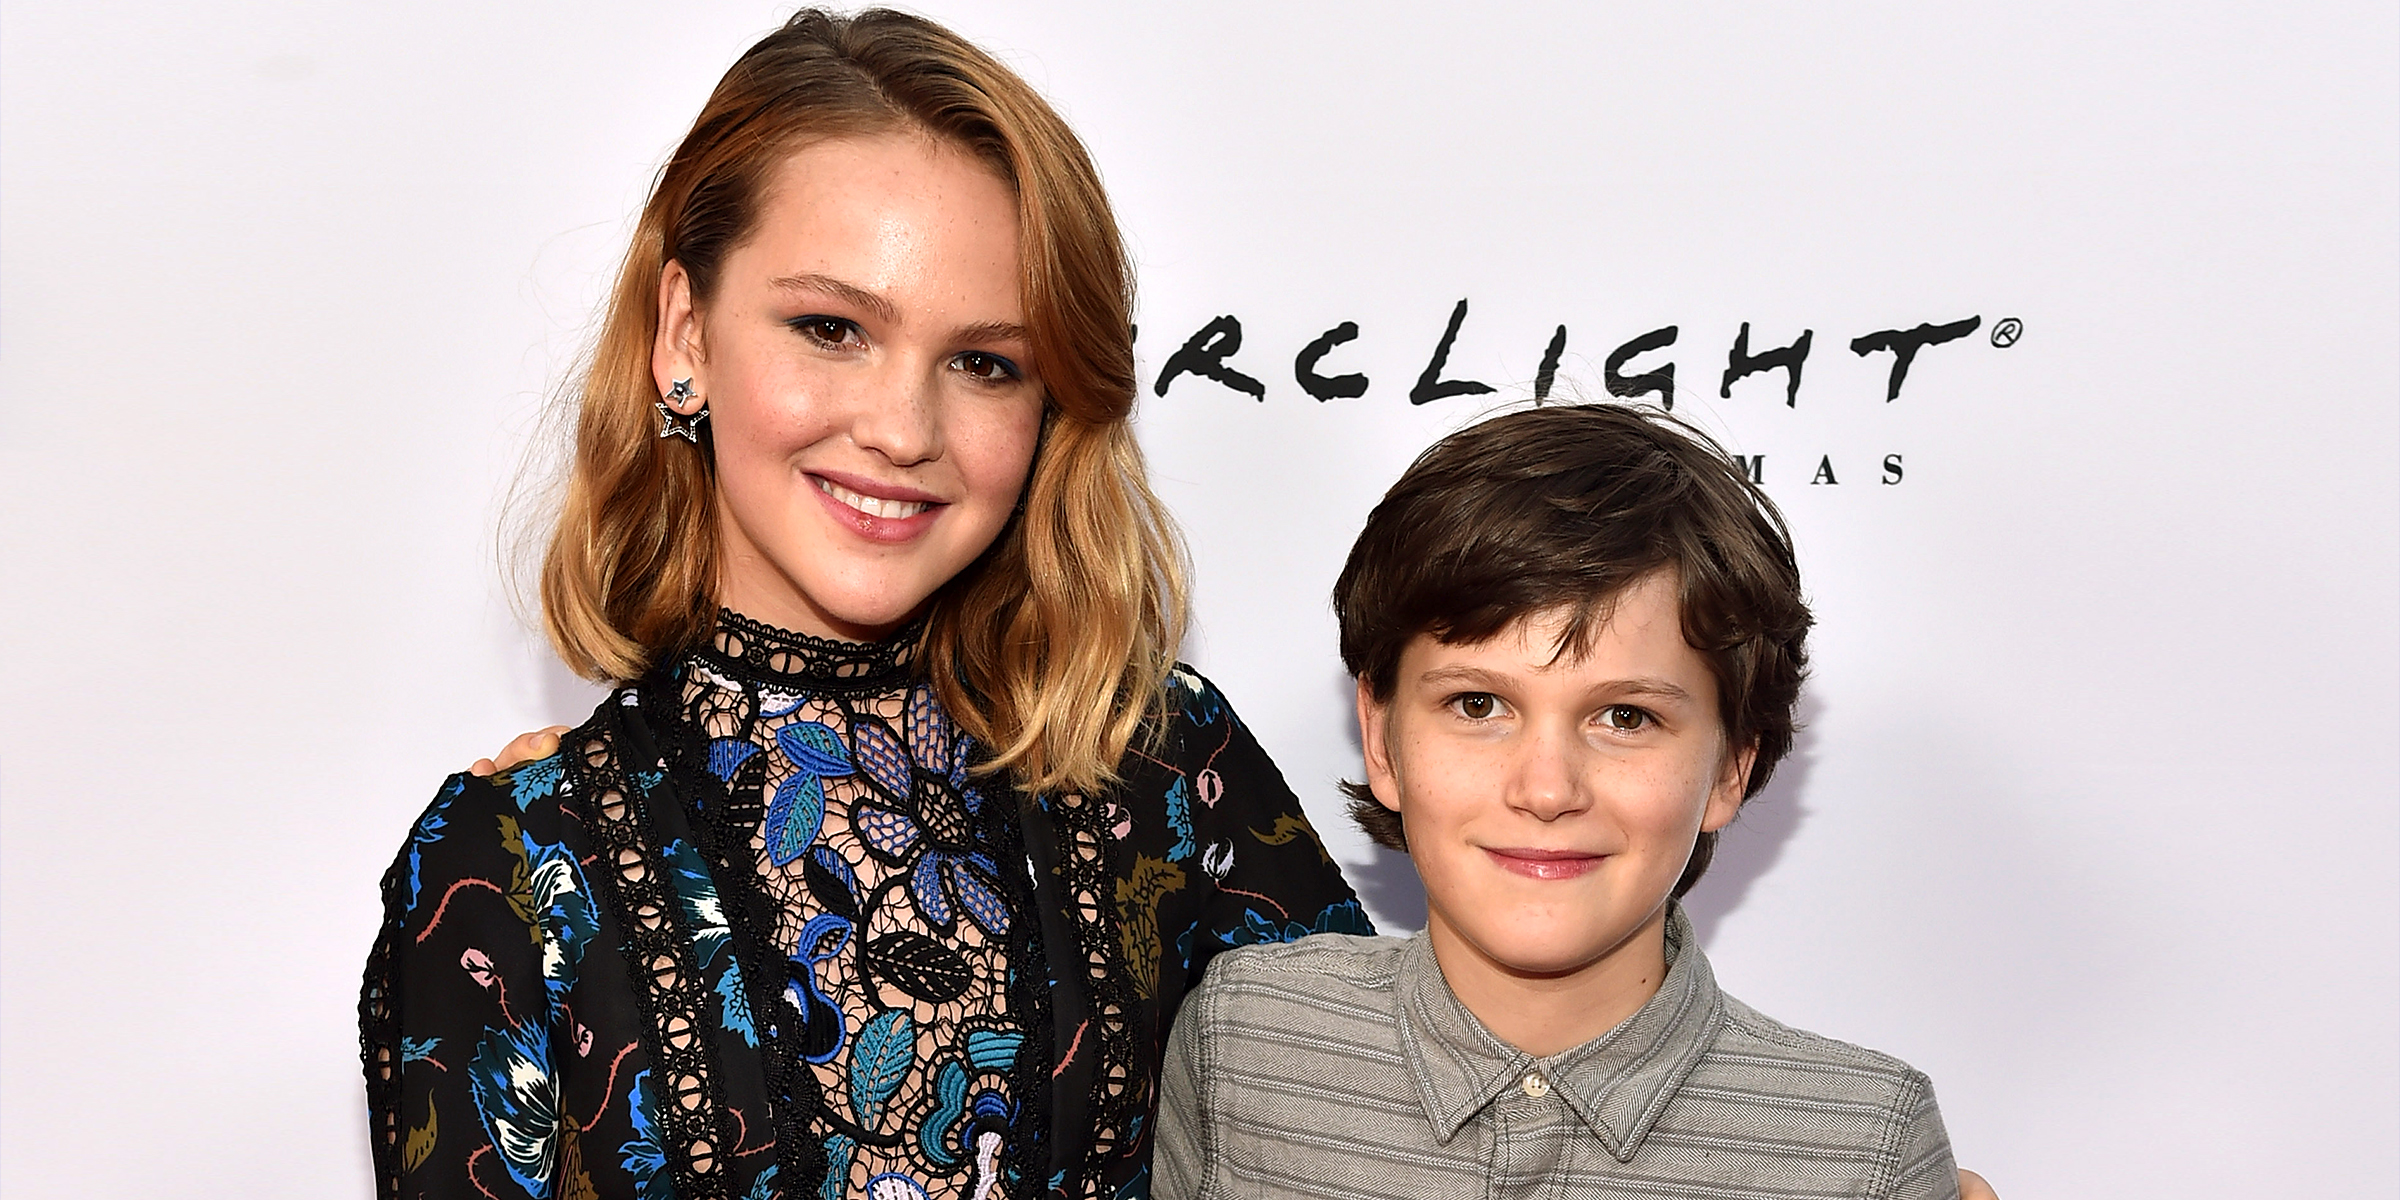 Talitha and Gabriel Bateman | Source: Getty Images